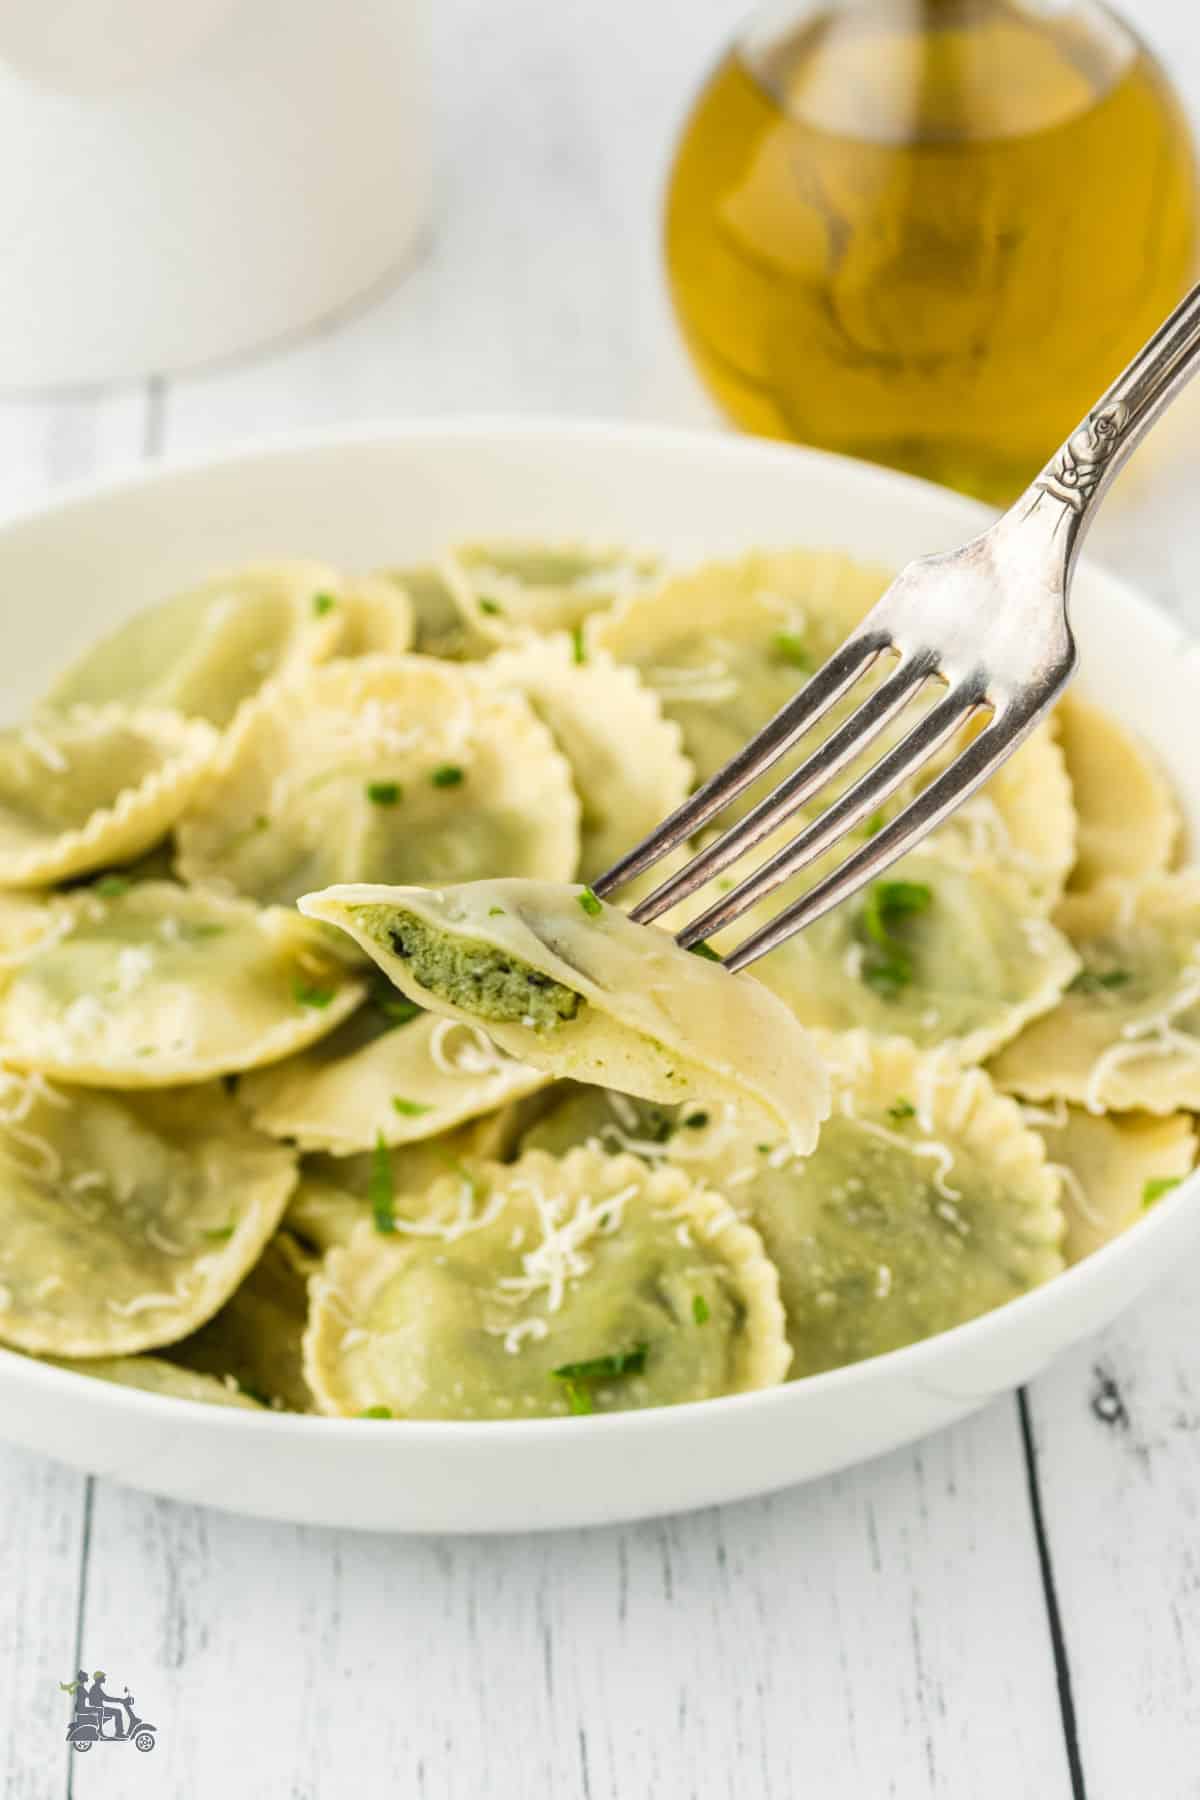 Homemade ravioli made with a spinach ricotta filling. 